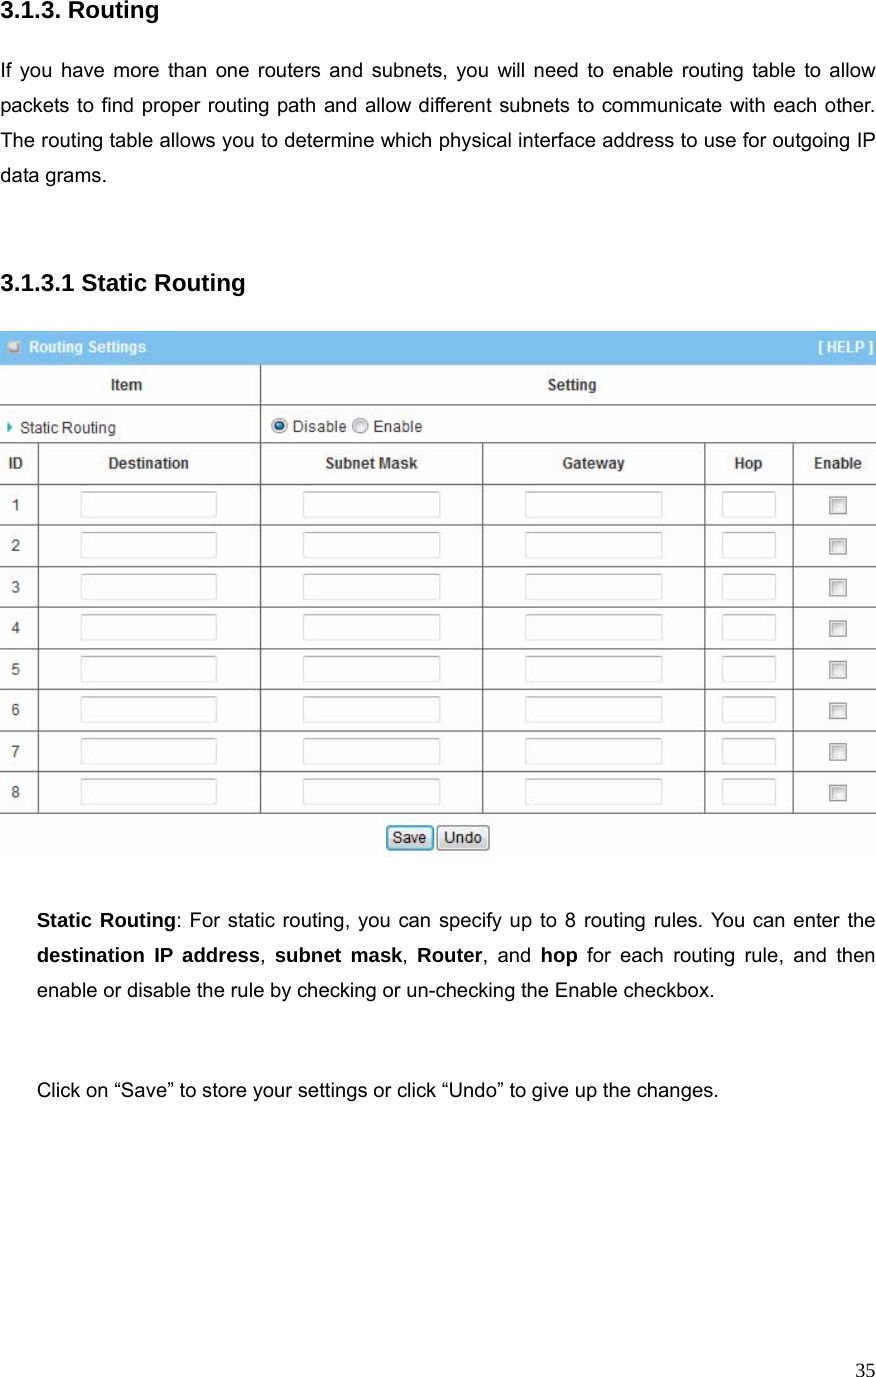  353.1.3. Routing  If you have more than one routers and subnets, you will need to enable routing table to allow packets to find proper routing path and allow different subnets to communicate with each other. The routing table allows you to determine which physical interface address to use for outgoing IP data grams.   3.1.3.1 Static Routing    Static Routing: For static routing, you can specify up to 8 routing rules. You can enter the destination IP address,  subnet mask,  Router, and hop for each routing rule, and then enable or disable the rule by checking or un-checking the Enable checkbox.   Click on “Save” to store your settings or click “Undo” to give up the changes.       